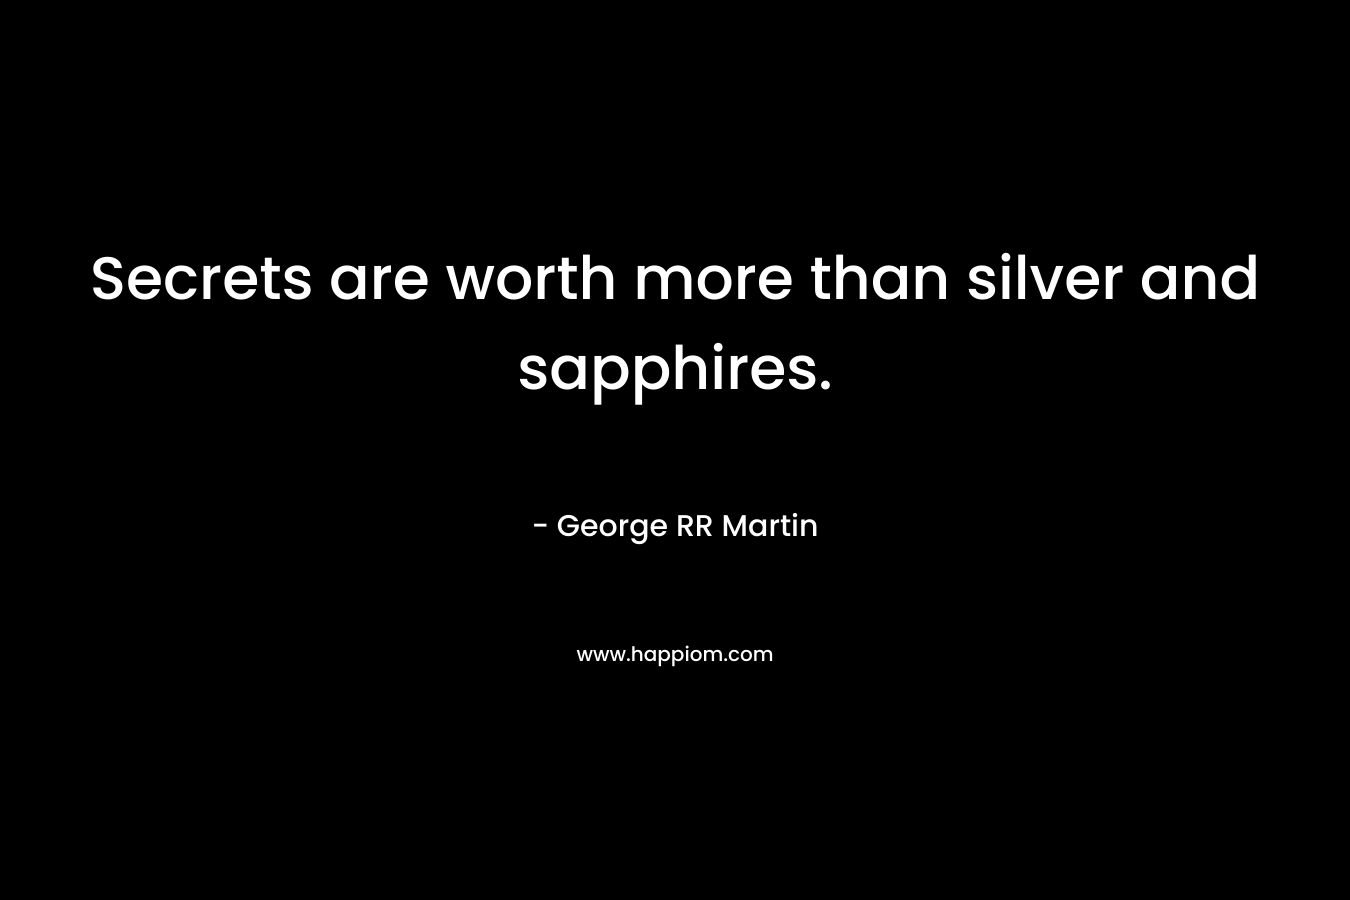 Secrets are worth more than silver and sapphires. – George RR Martin